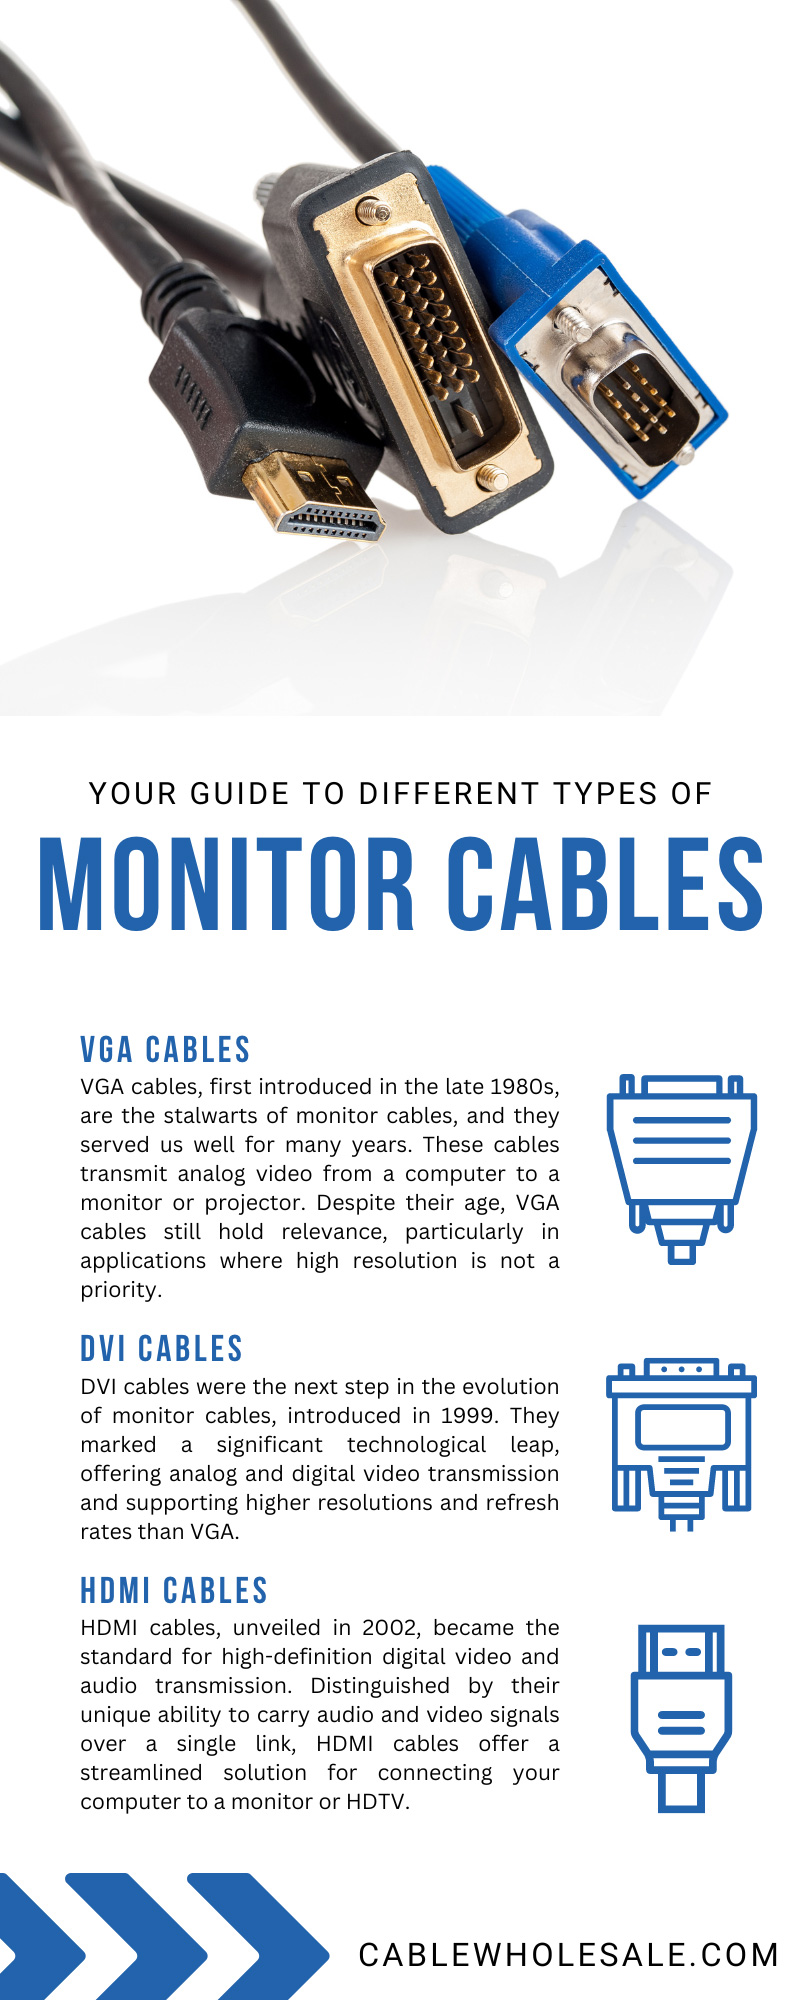 Your Guide to Different Types of Monitor Cables